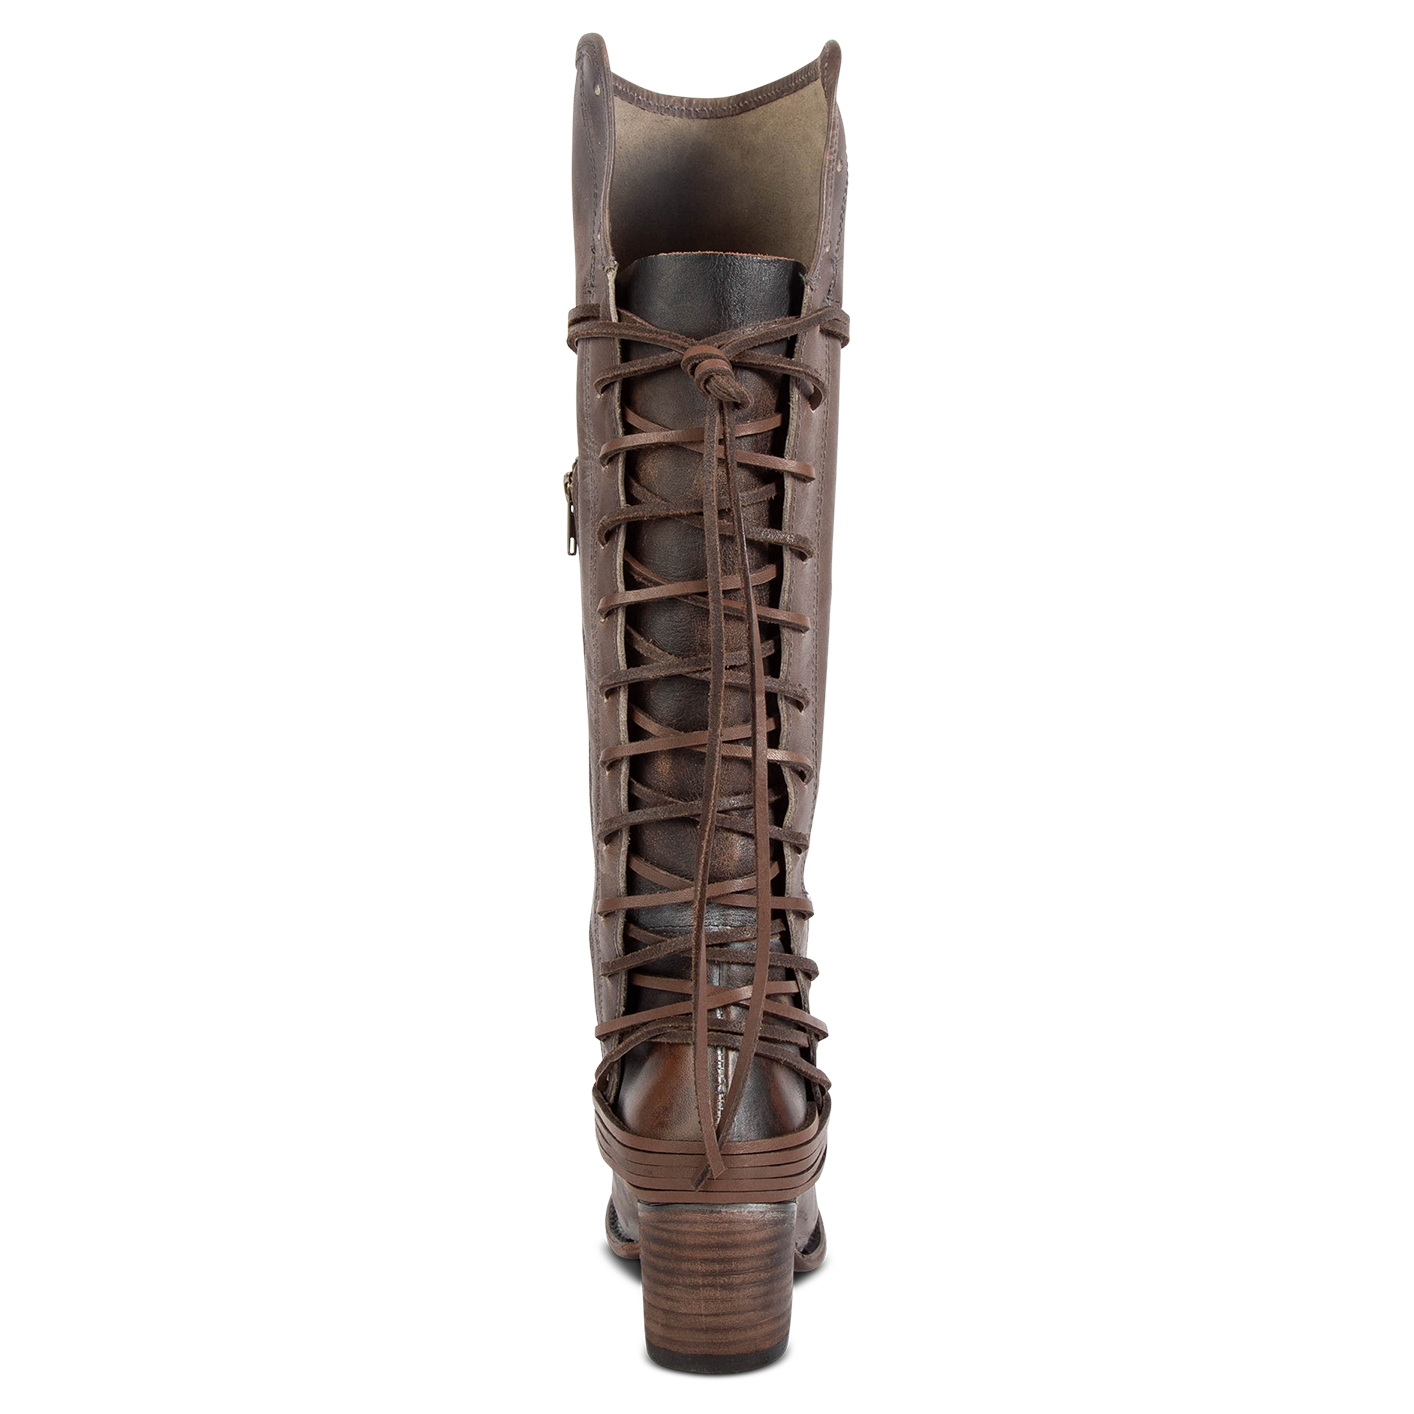 Back view showing expandable panel with adjustable leather lacing on FREEBIRD women's Coal stone tall boot